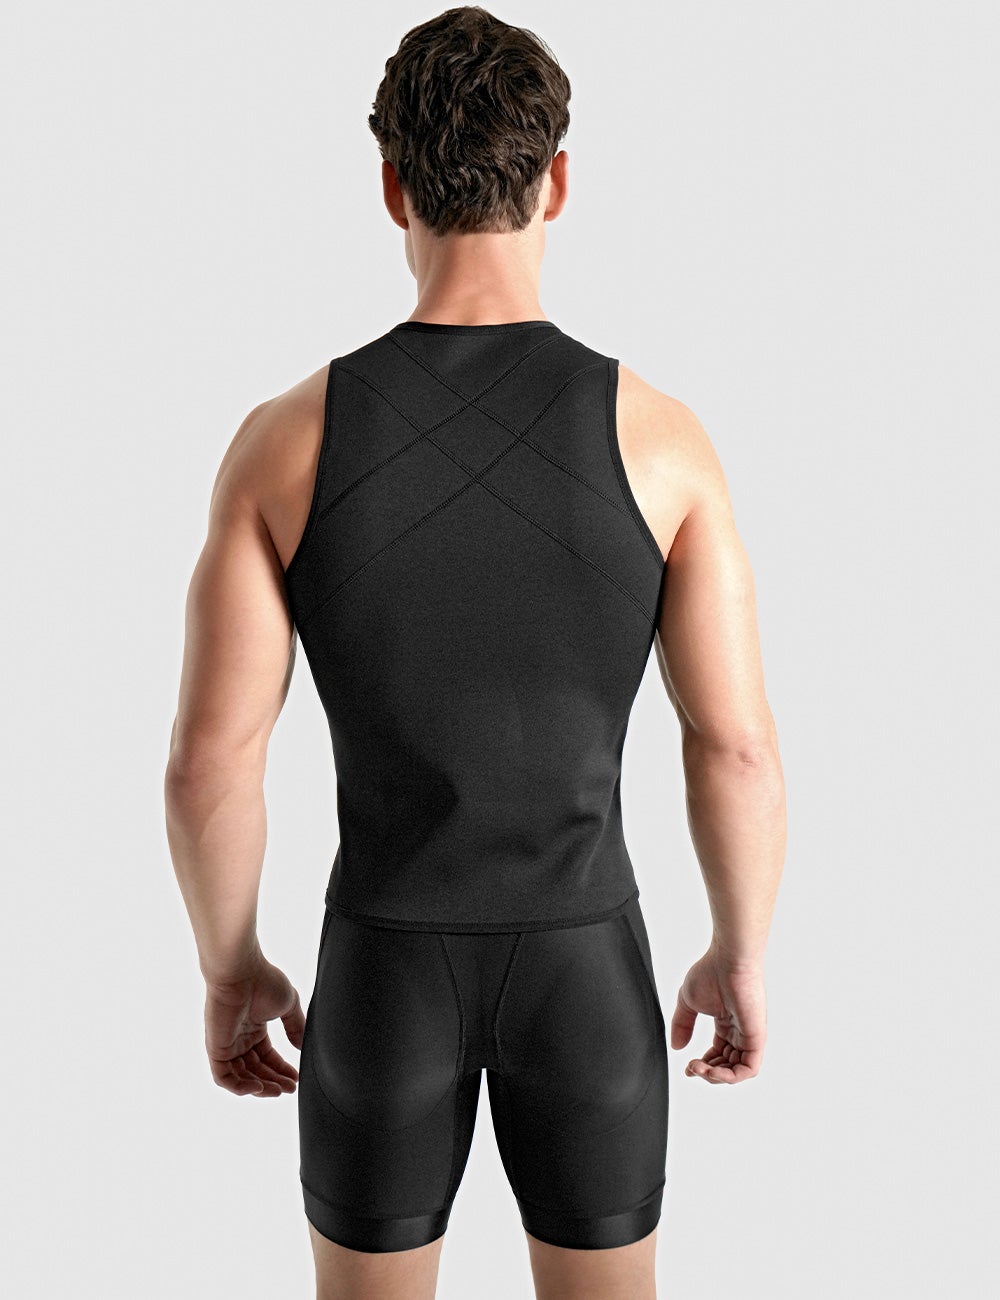 Men Training Vest Weight Loss Hot Polymer Compression Sweat